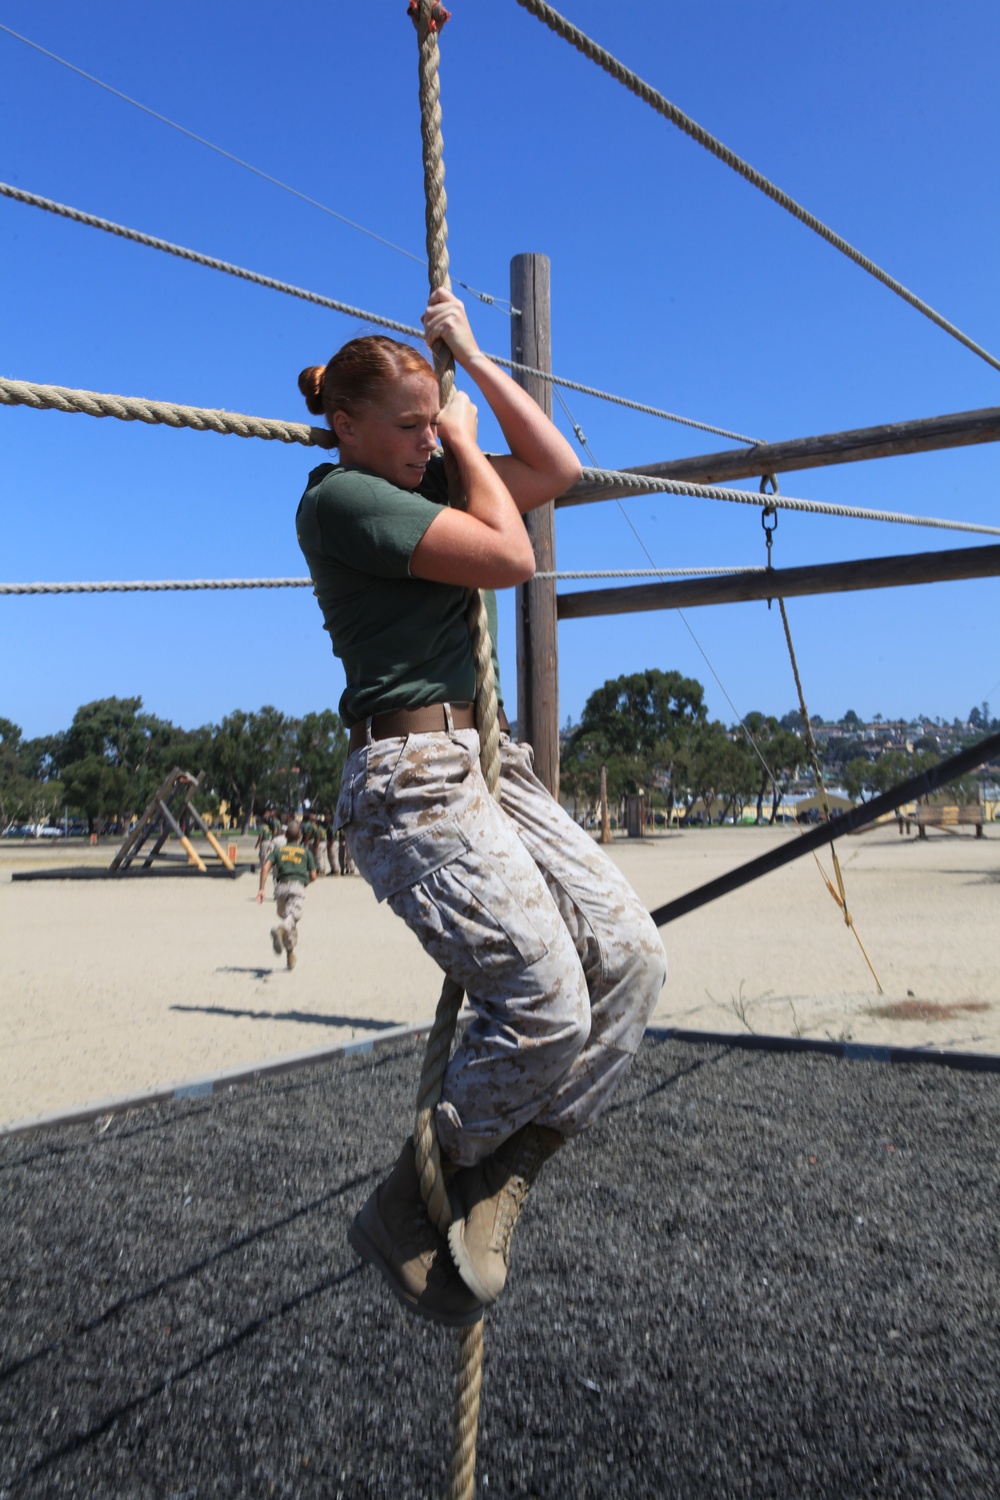 Corporals get down, dirty at confidence course